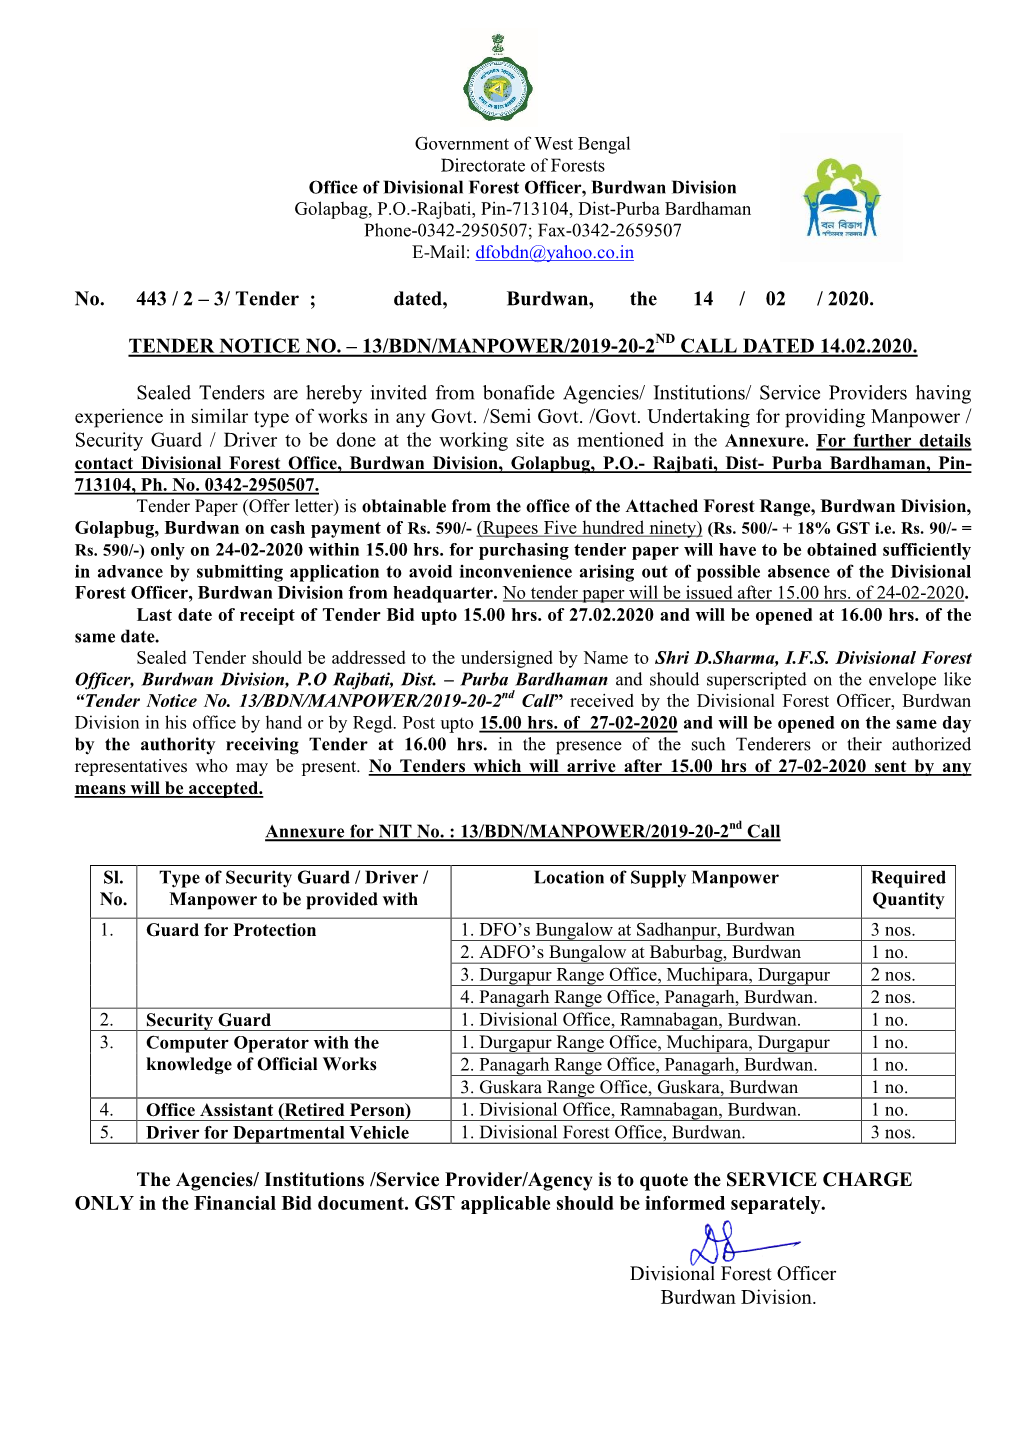 Dated, Burdwan, the 14 / 02 / 2020. TENDER NOTICE